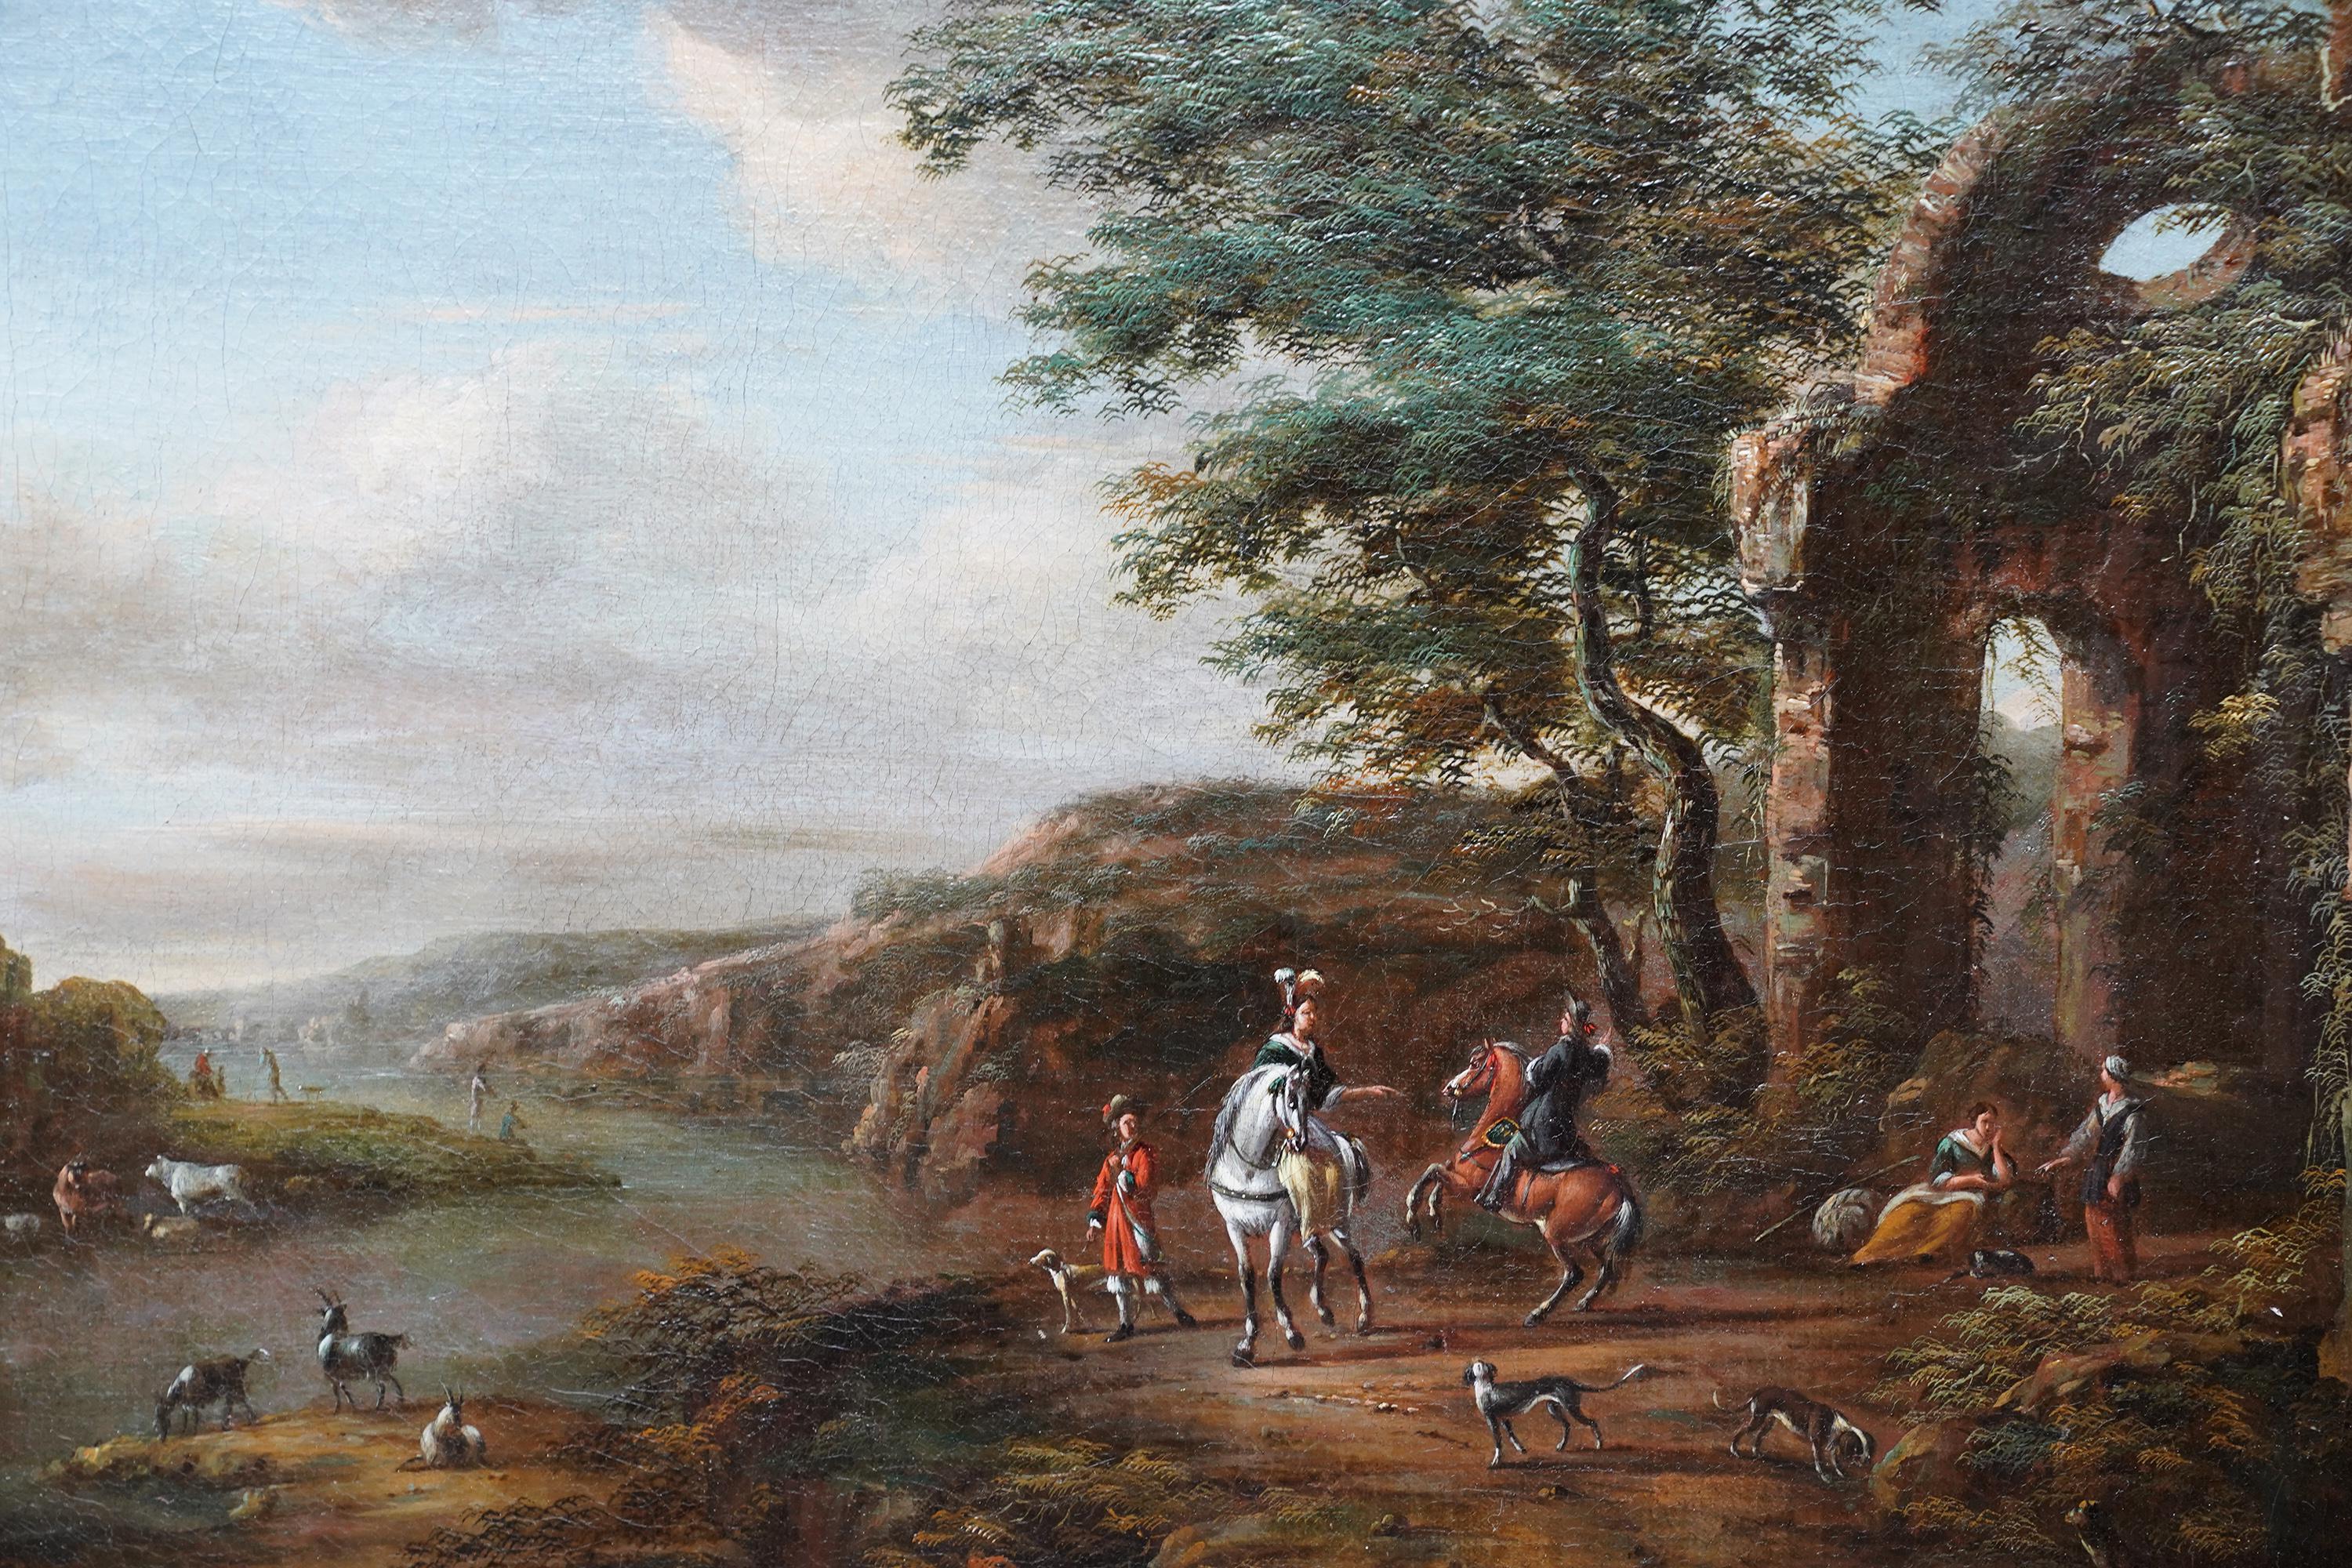 Travellers and Dogs in Landscape, Ruins on Right - Dutch Old Master oil painting For Sale 5